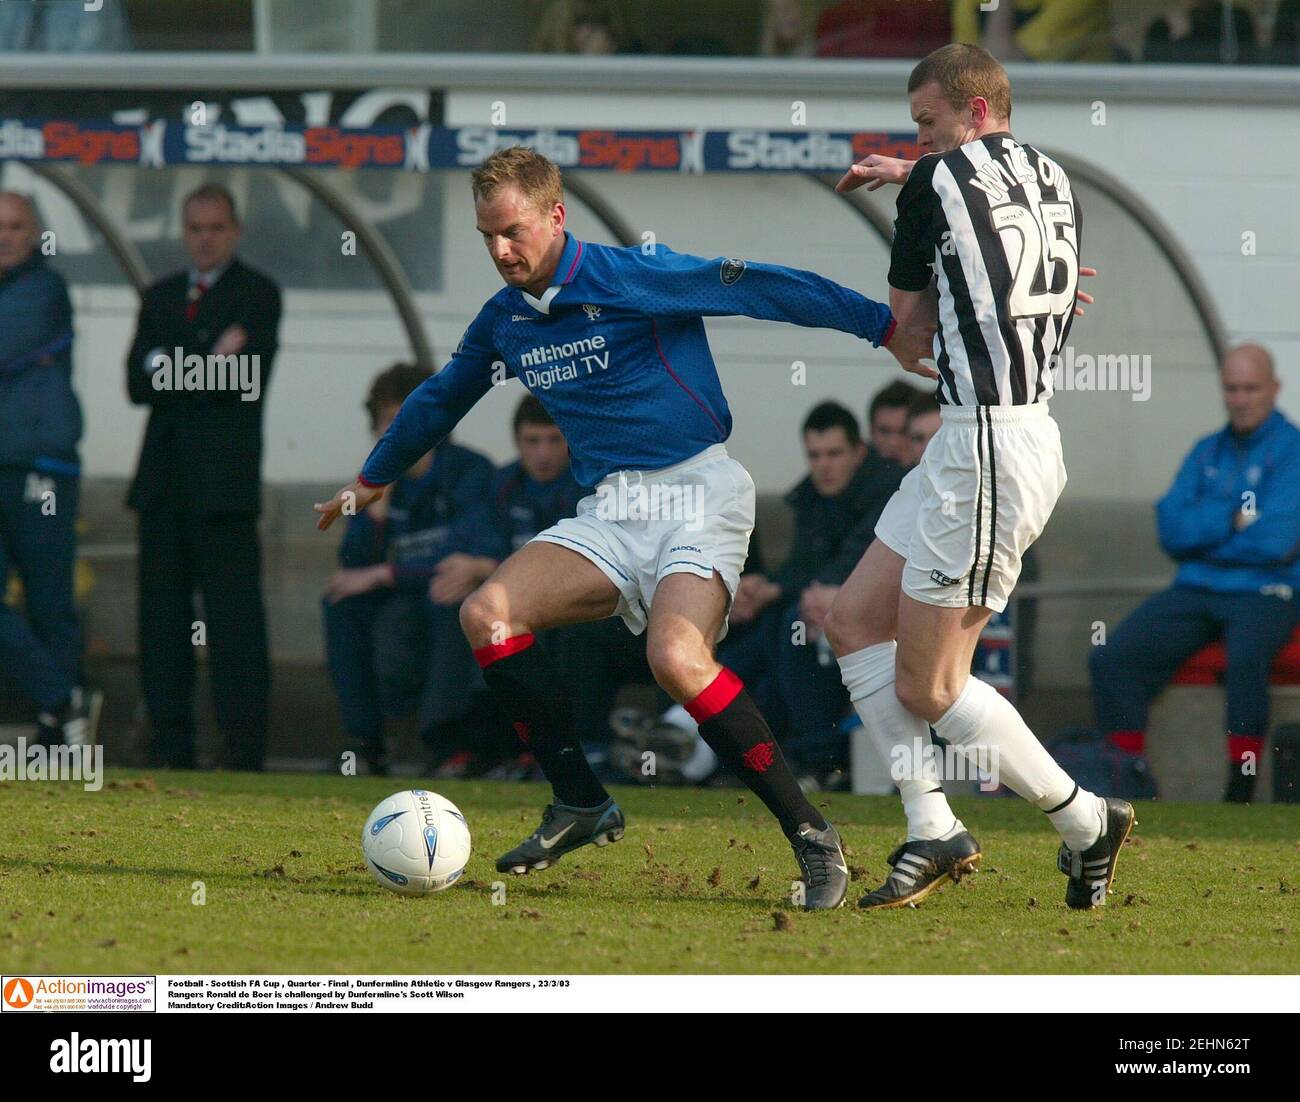 Football - Scottish FA Cup , Quarter - Final , Dunfermline Athletic v Glasgow Rangers , 23/3/03  Rangers Ronald de Boer is challenged by Dunfermline's Scott Wilson  Mandatory Credit:Action Images / Andrew Budd Stock Photo